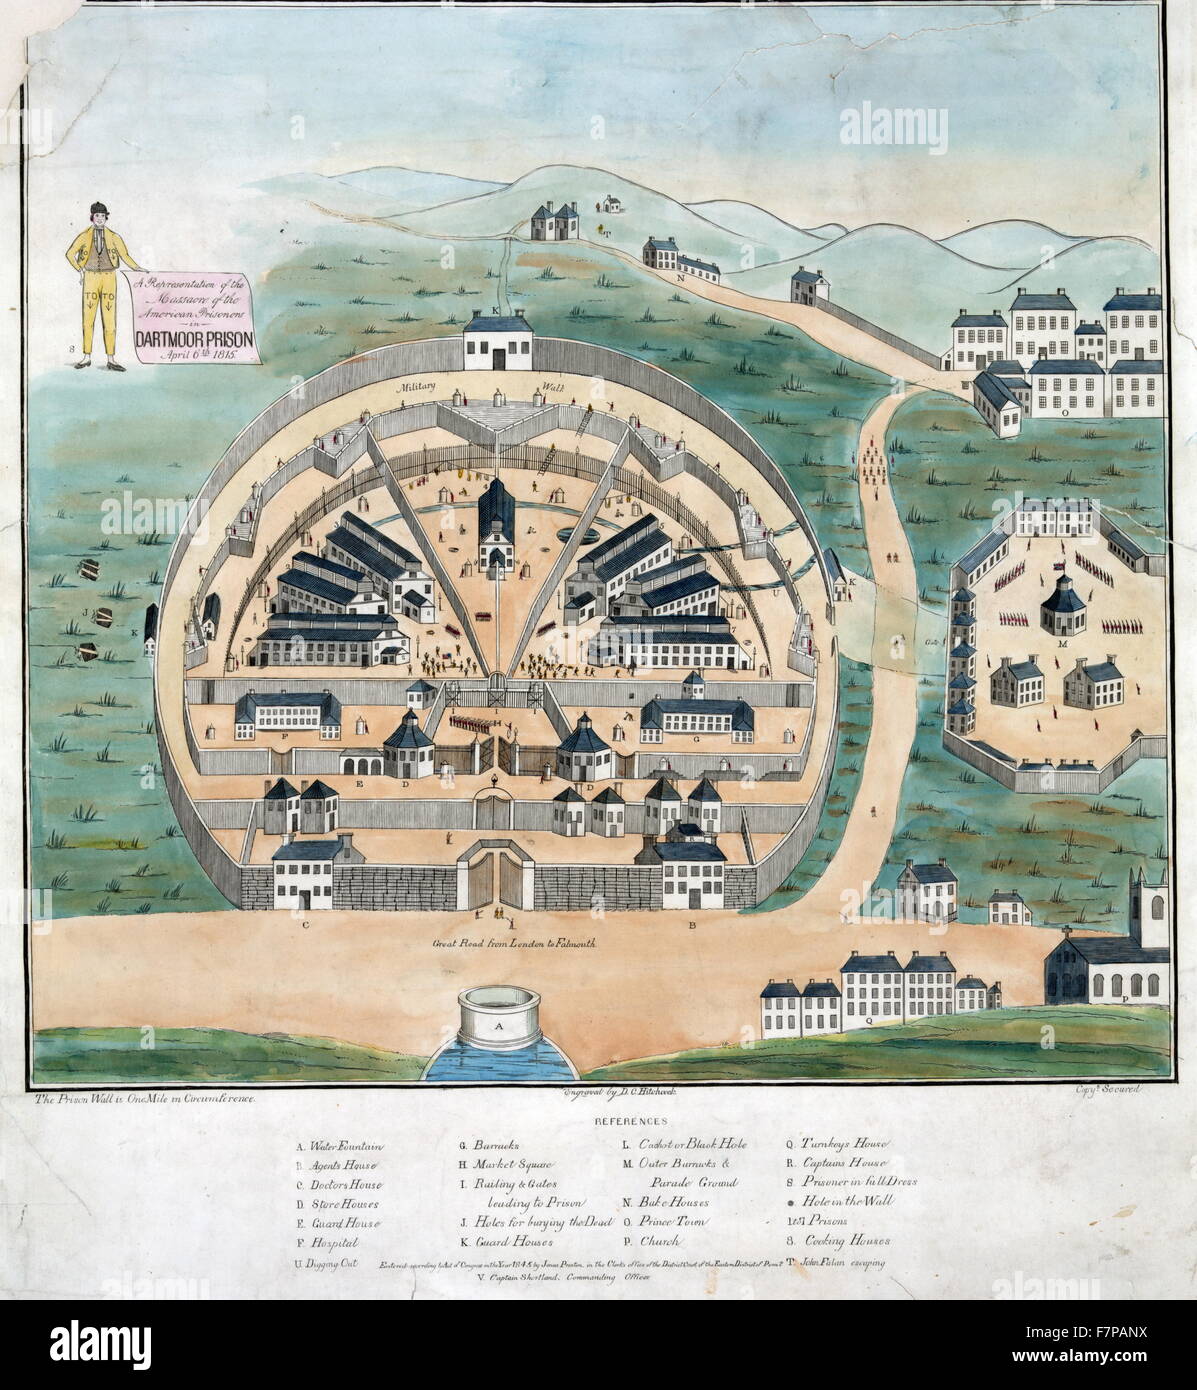 A representation of the massacre of American prisoners in Dartmoor Prison on April 6th, 1815. Colour engraving of Dartmoor Prison in Devon, England, where American prisoners of war captured by British forces, especially at sea, were confined, even after the Treaty of Ghent was signed in Dec. 1814. Angered at being left behind, prisoners burned U.S. agent Reuben G. Beasley in effigy, which led to a confrontation with prison guards and a reduction of rations. Fearful of insubordination, guards shot the prisoners, killing 7 and wounding 31. Stock Photo